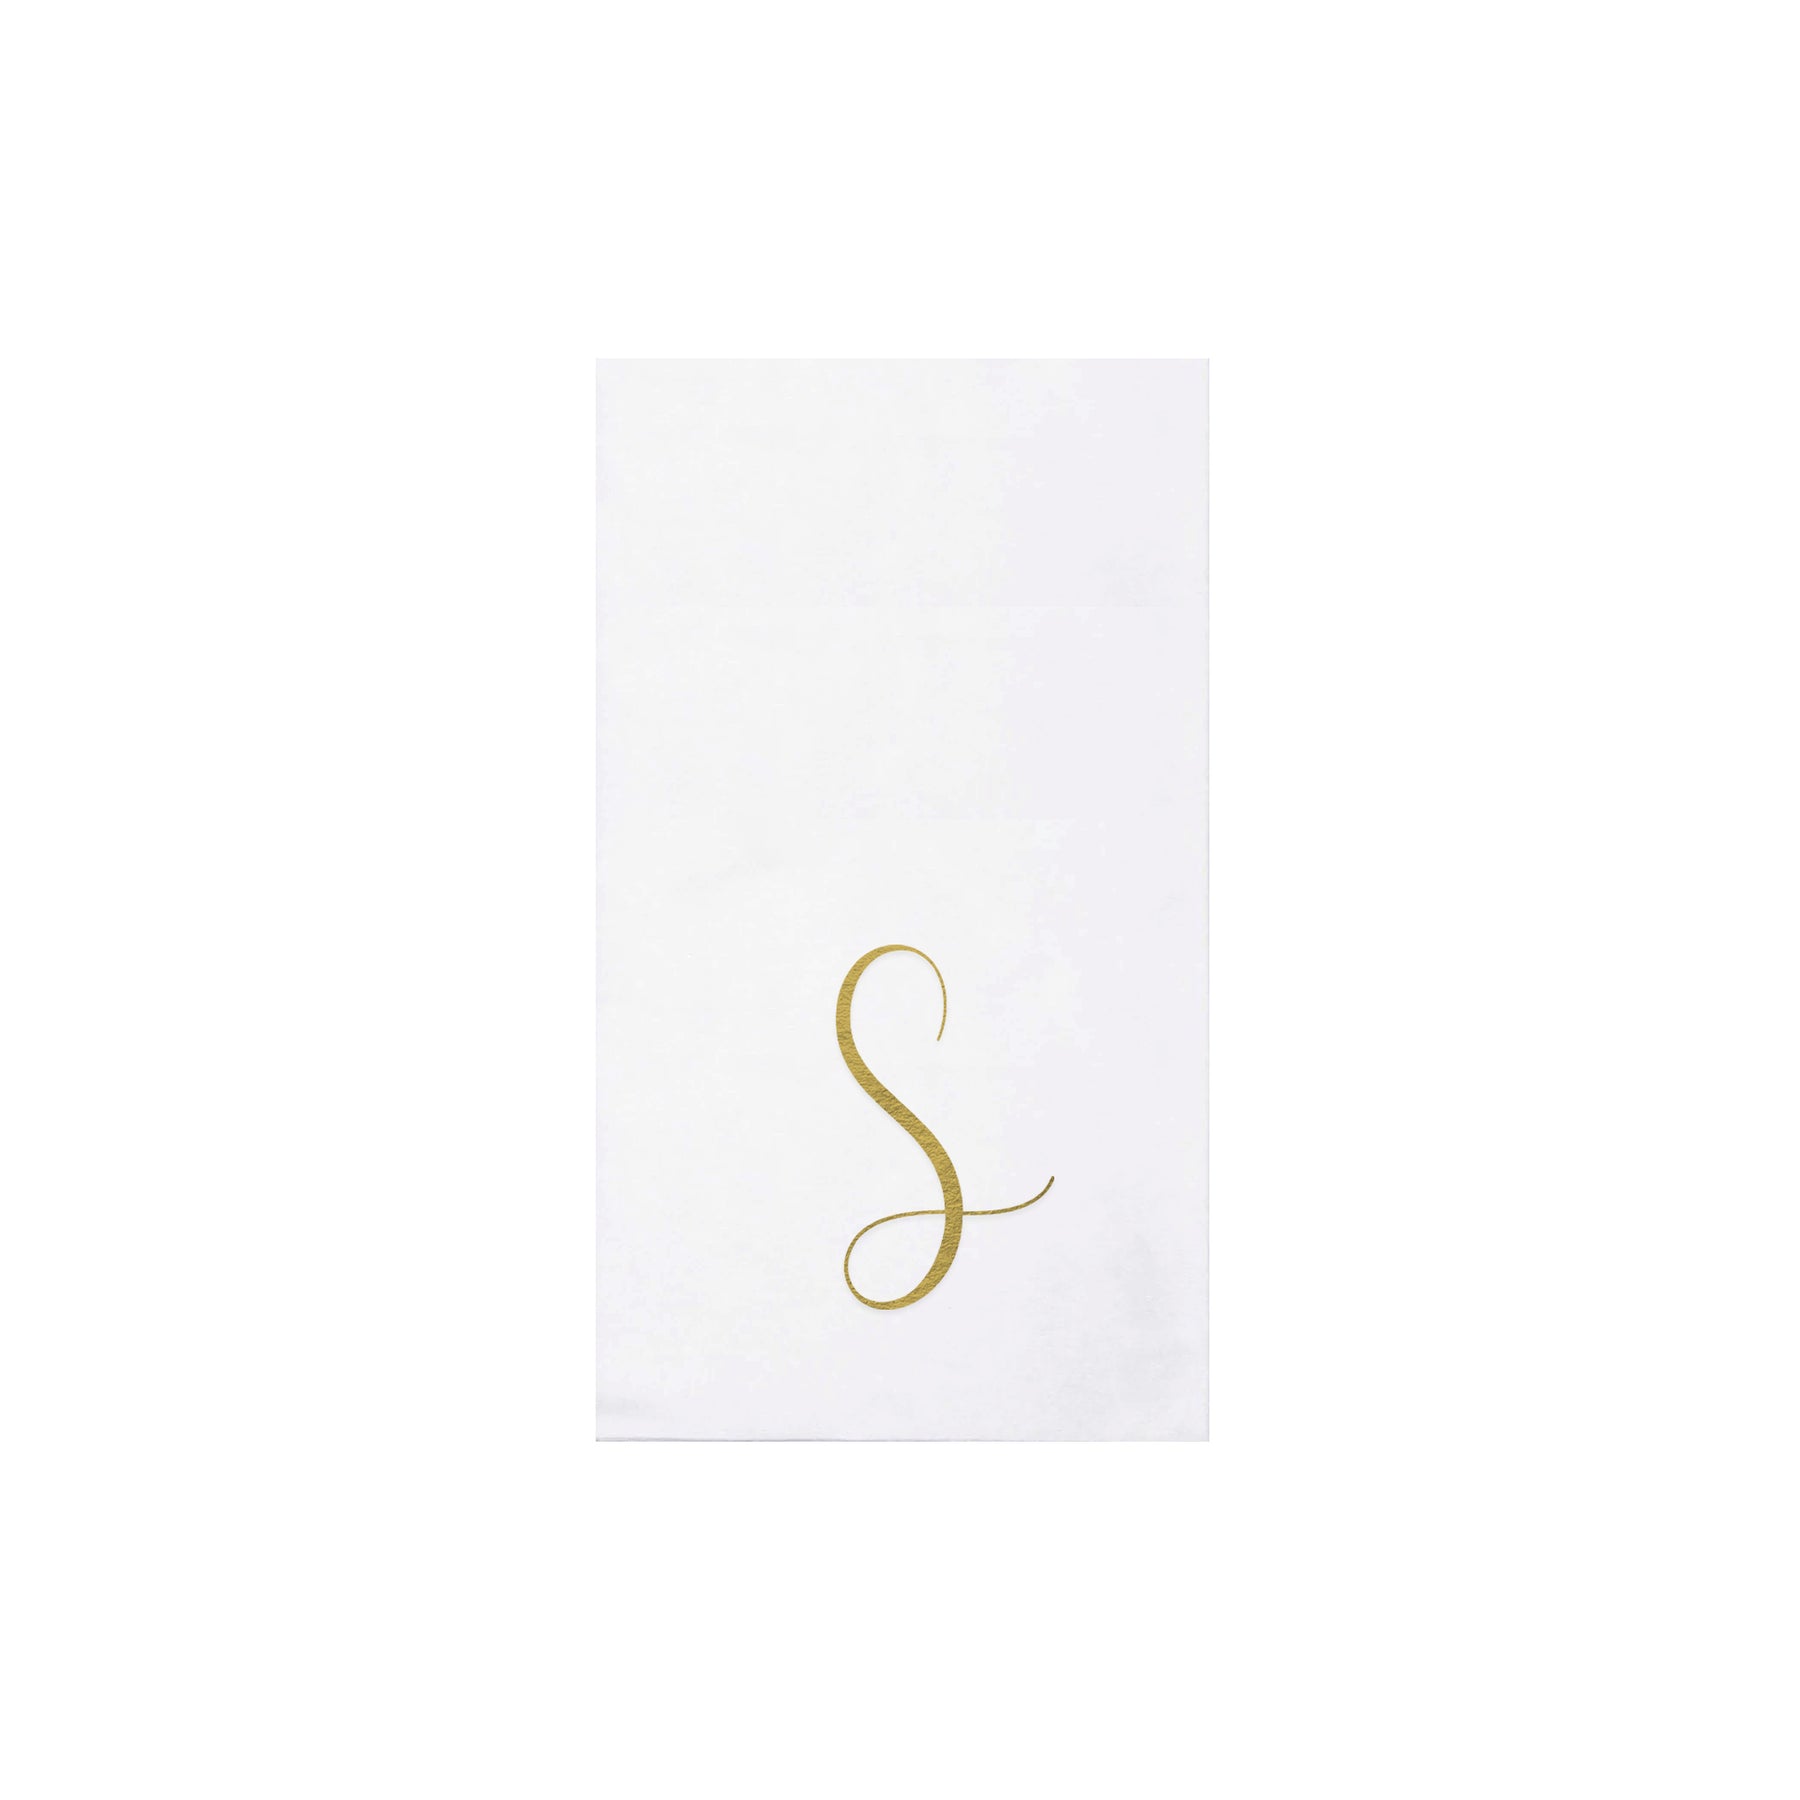 Papersoft Napkins Monogram Guest Towels - S